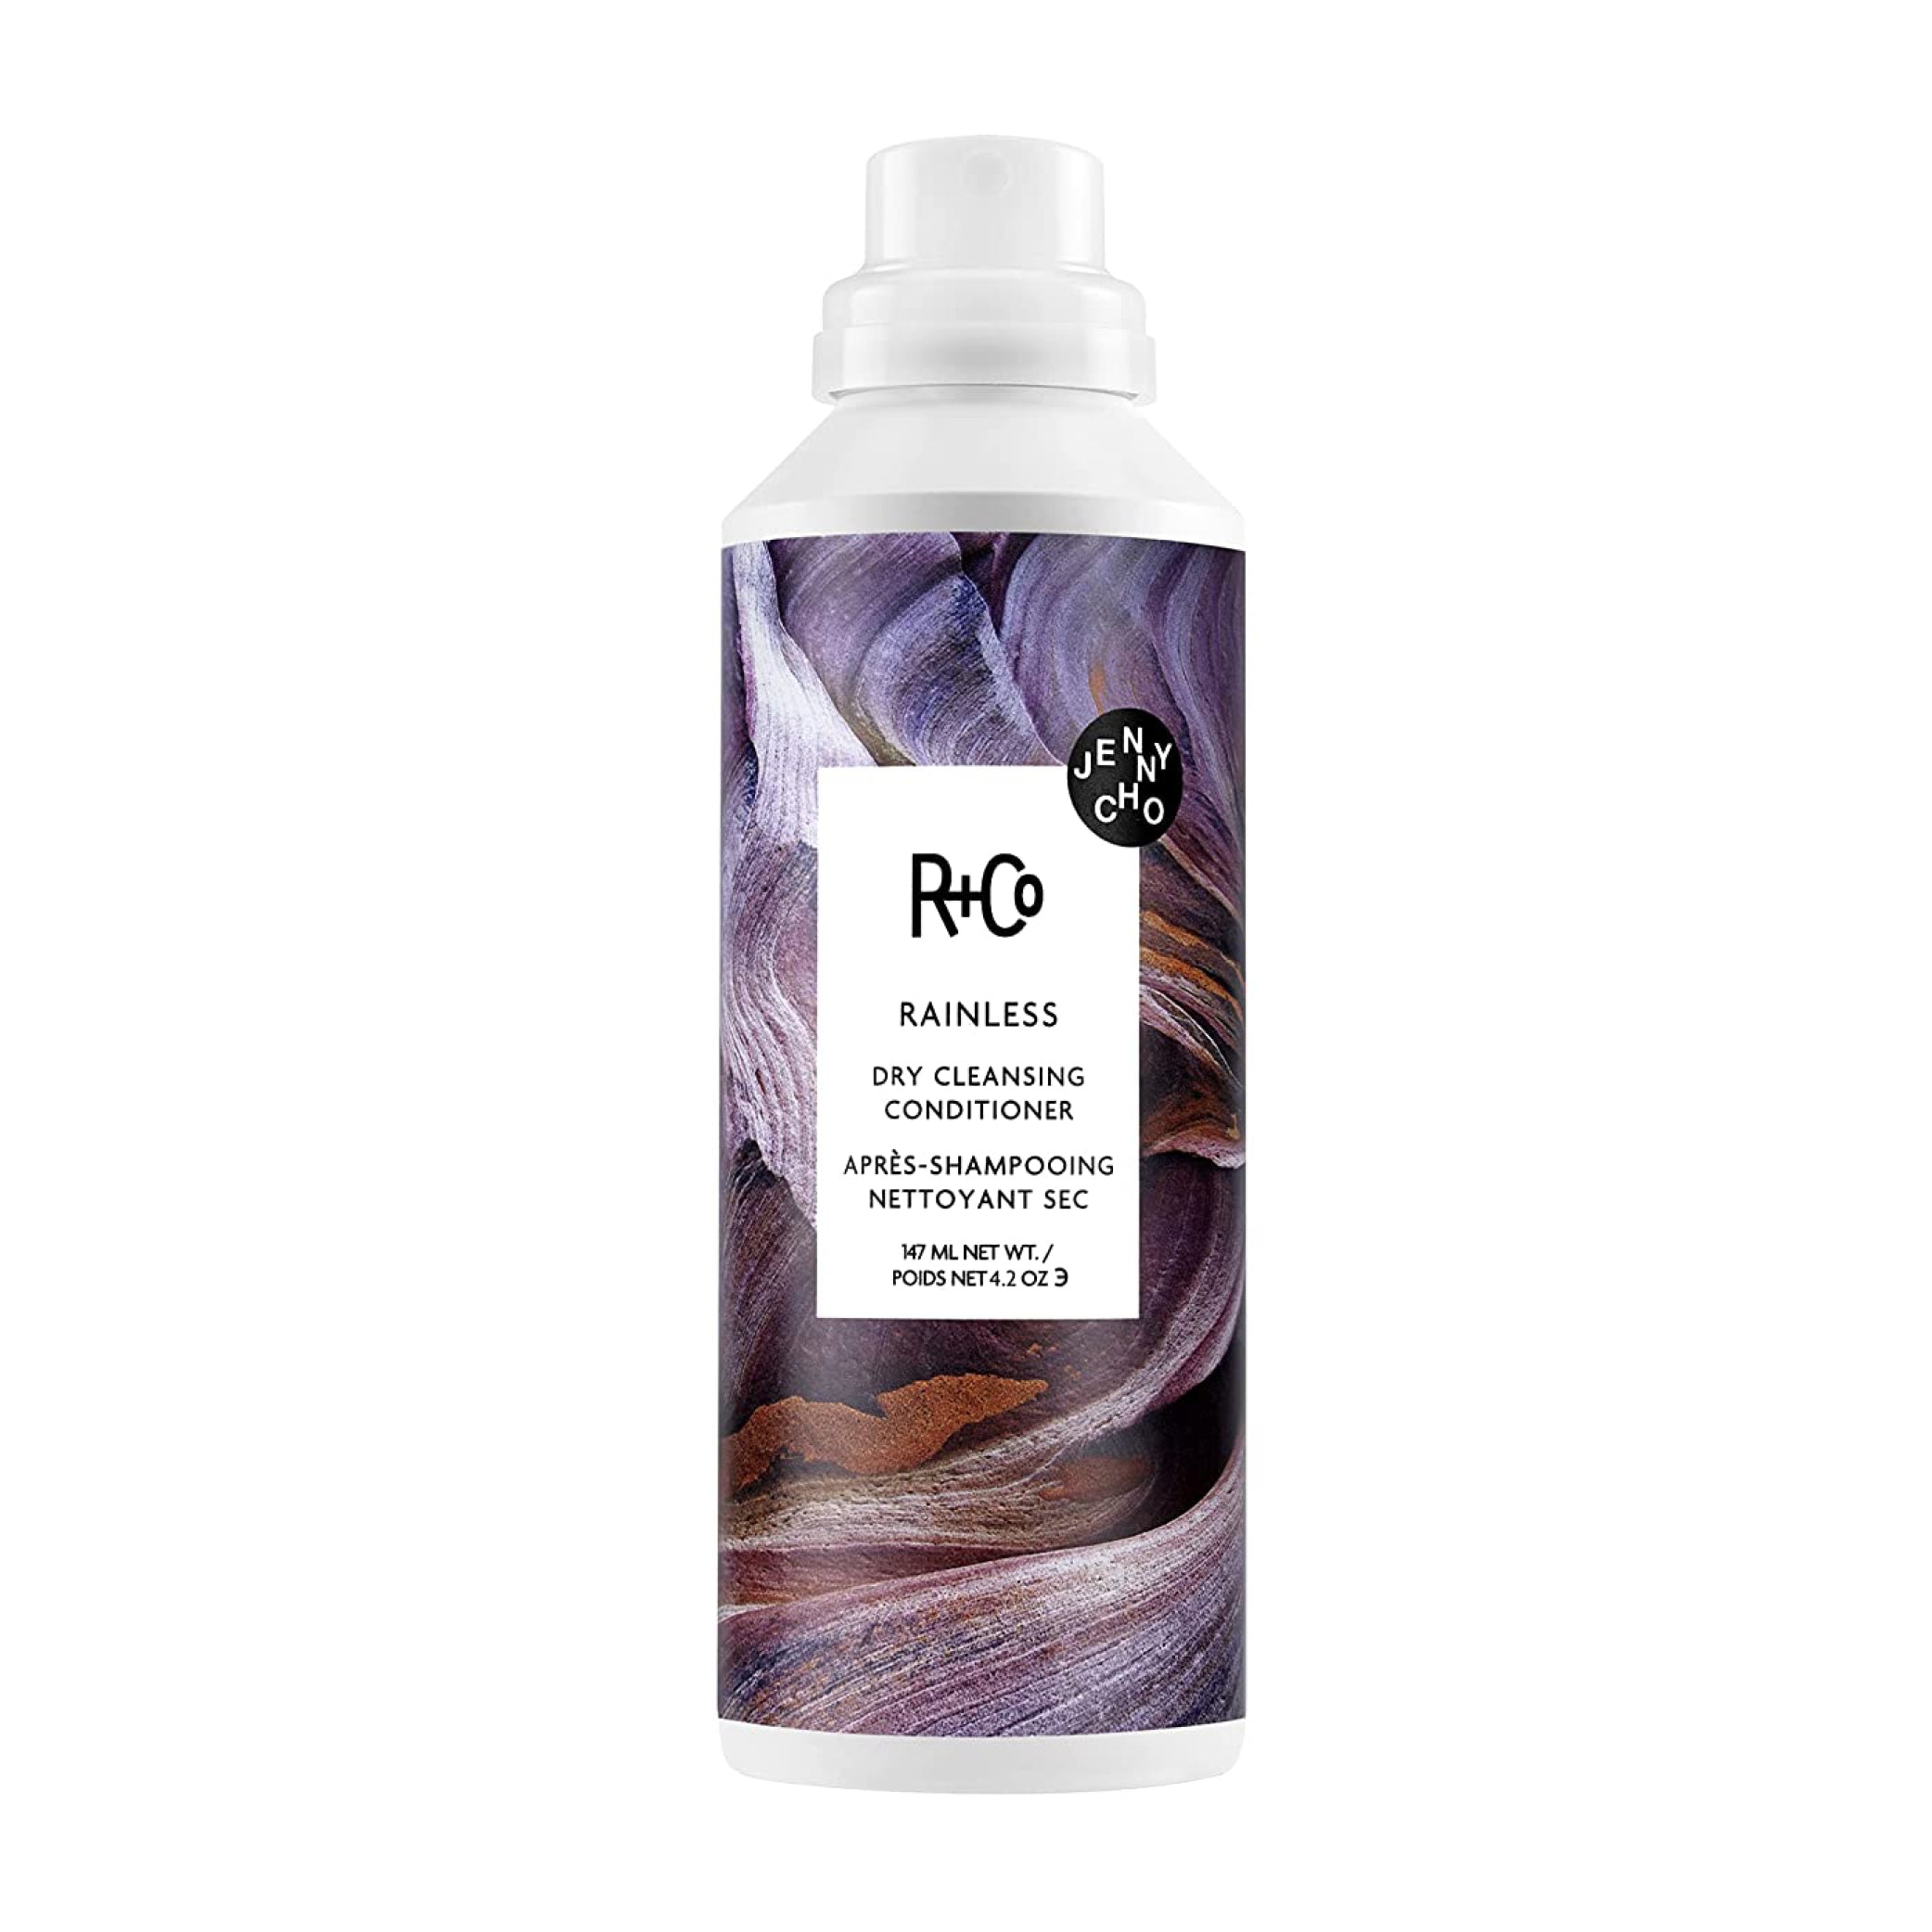 Rainless Dry Cleansing Conditioner